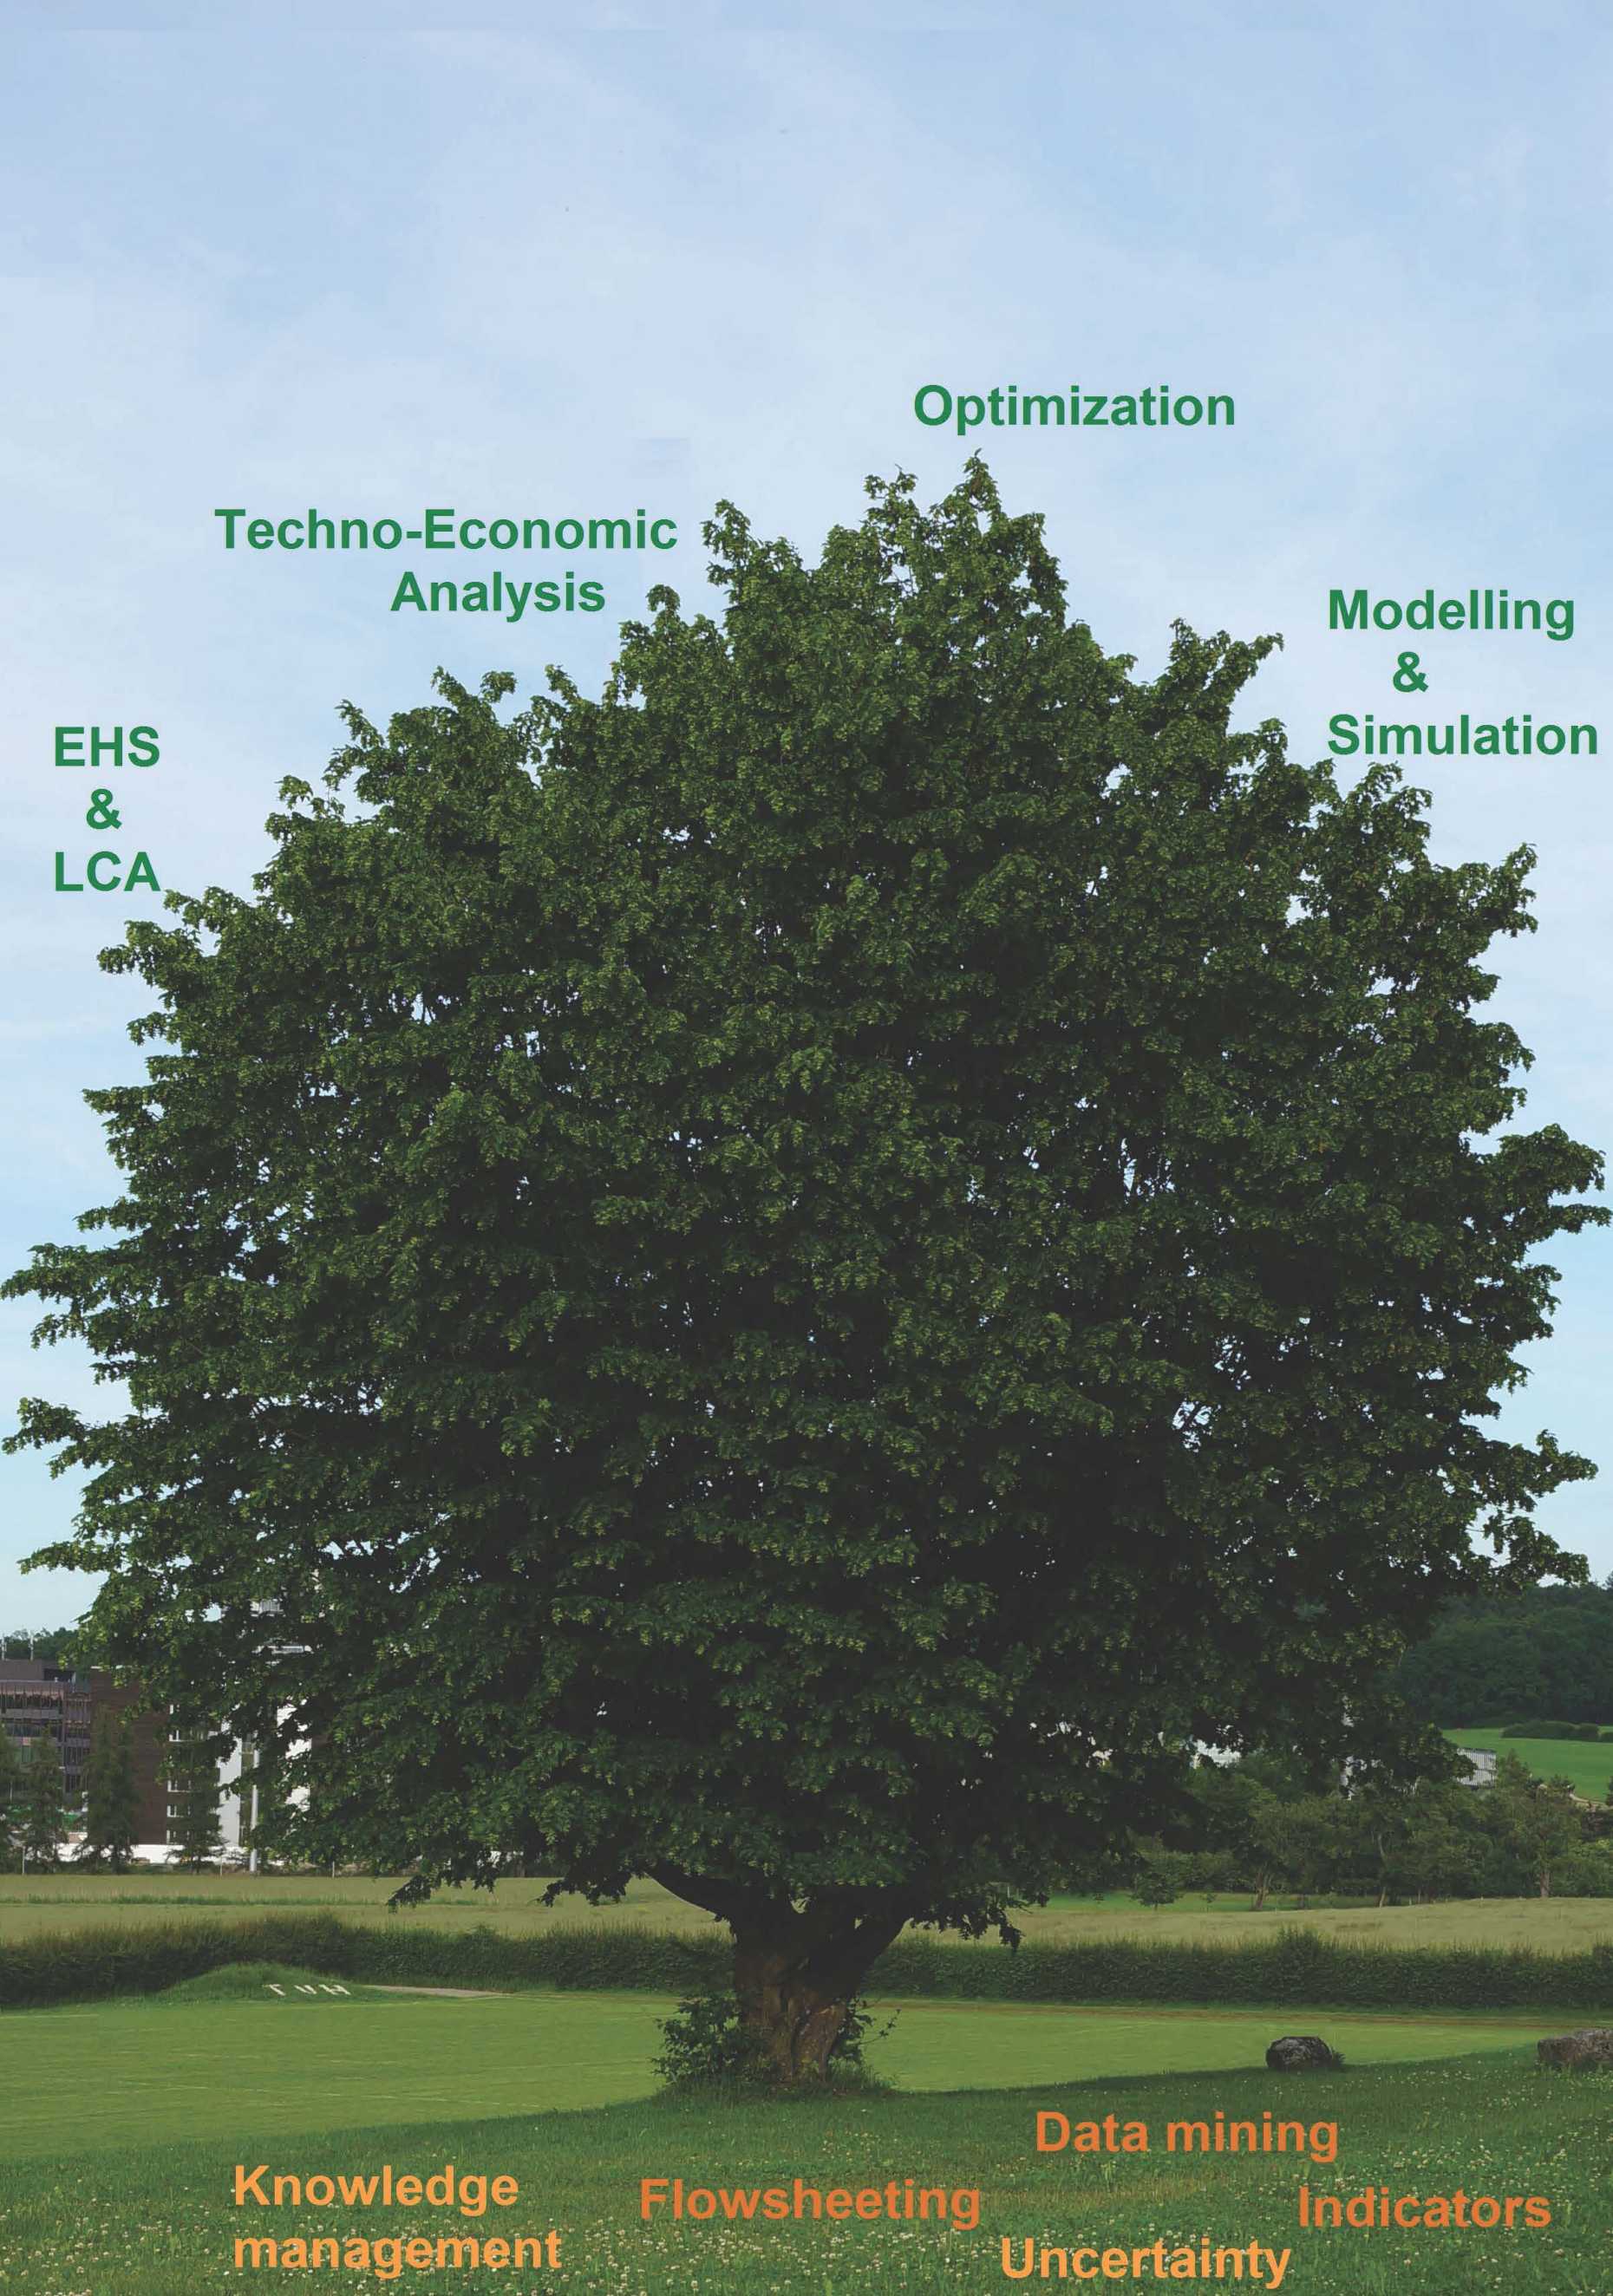 Tree structure of research focus